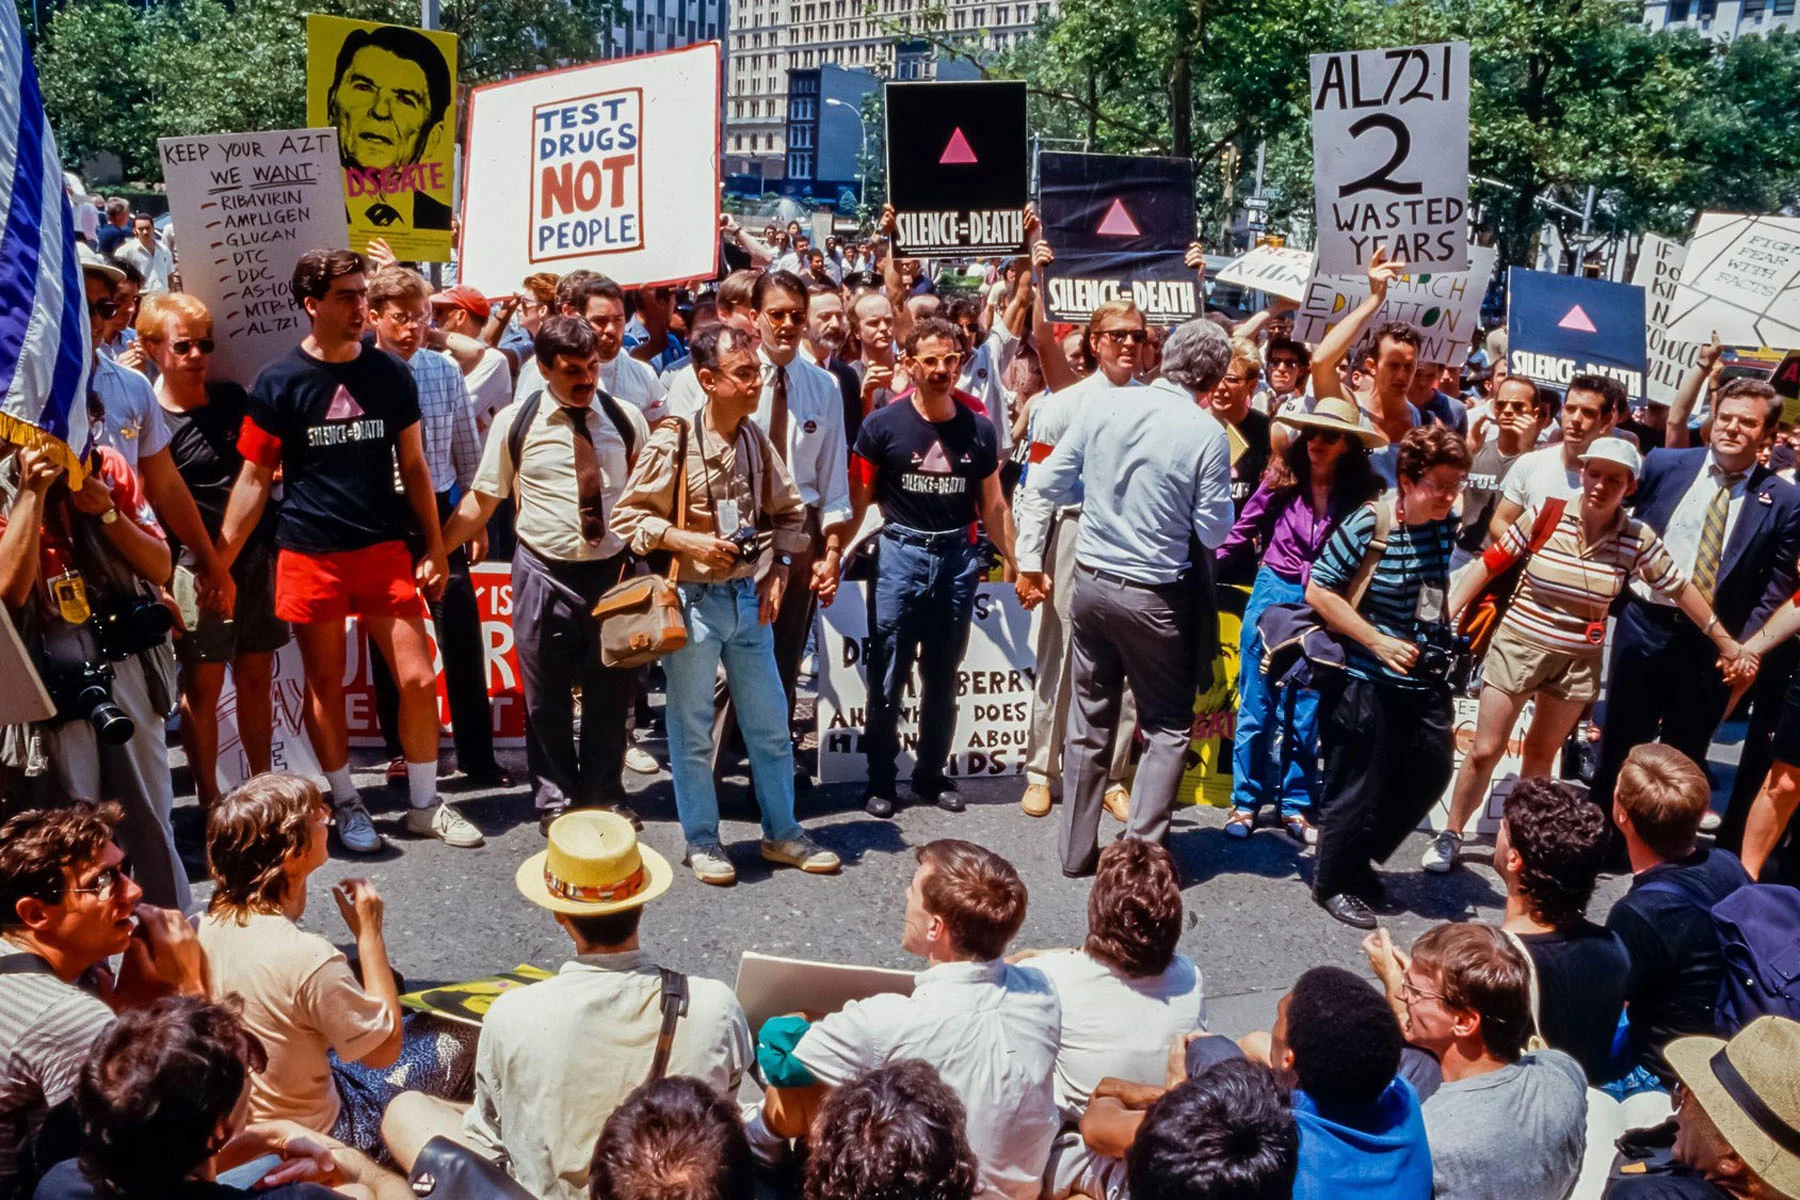 History Archive - STORIES: The Foundation for the AIDS Monument